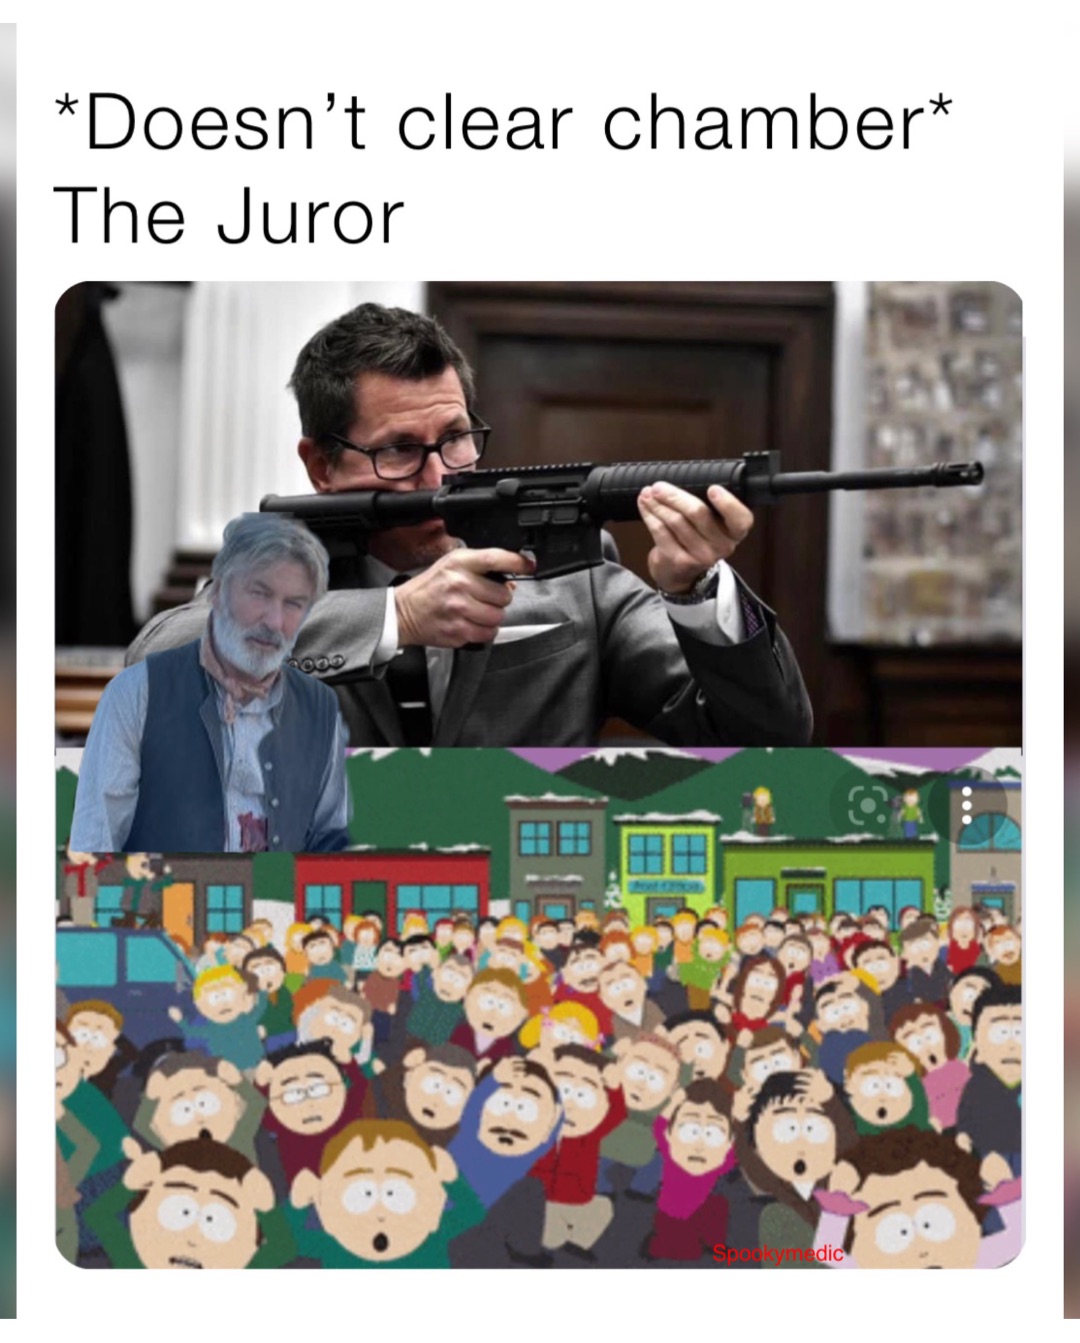 *Doesn’t clear chamber*
The Juror